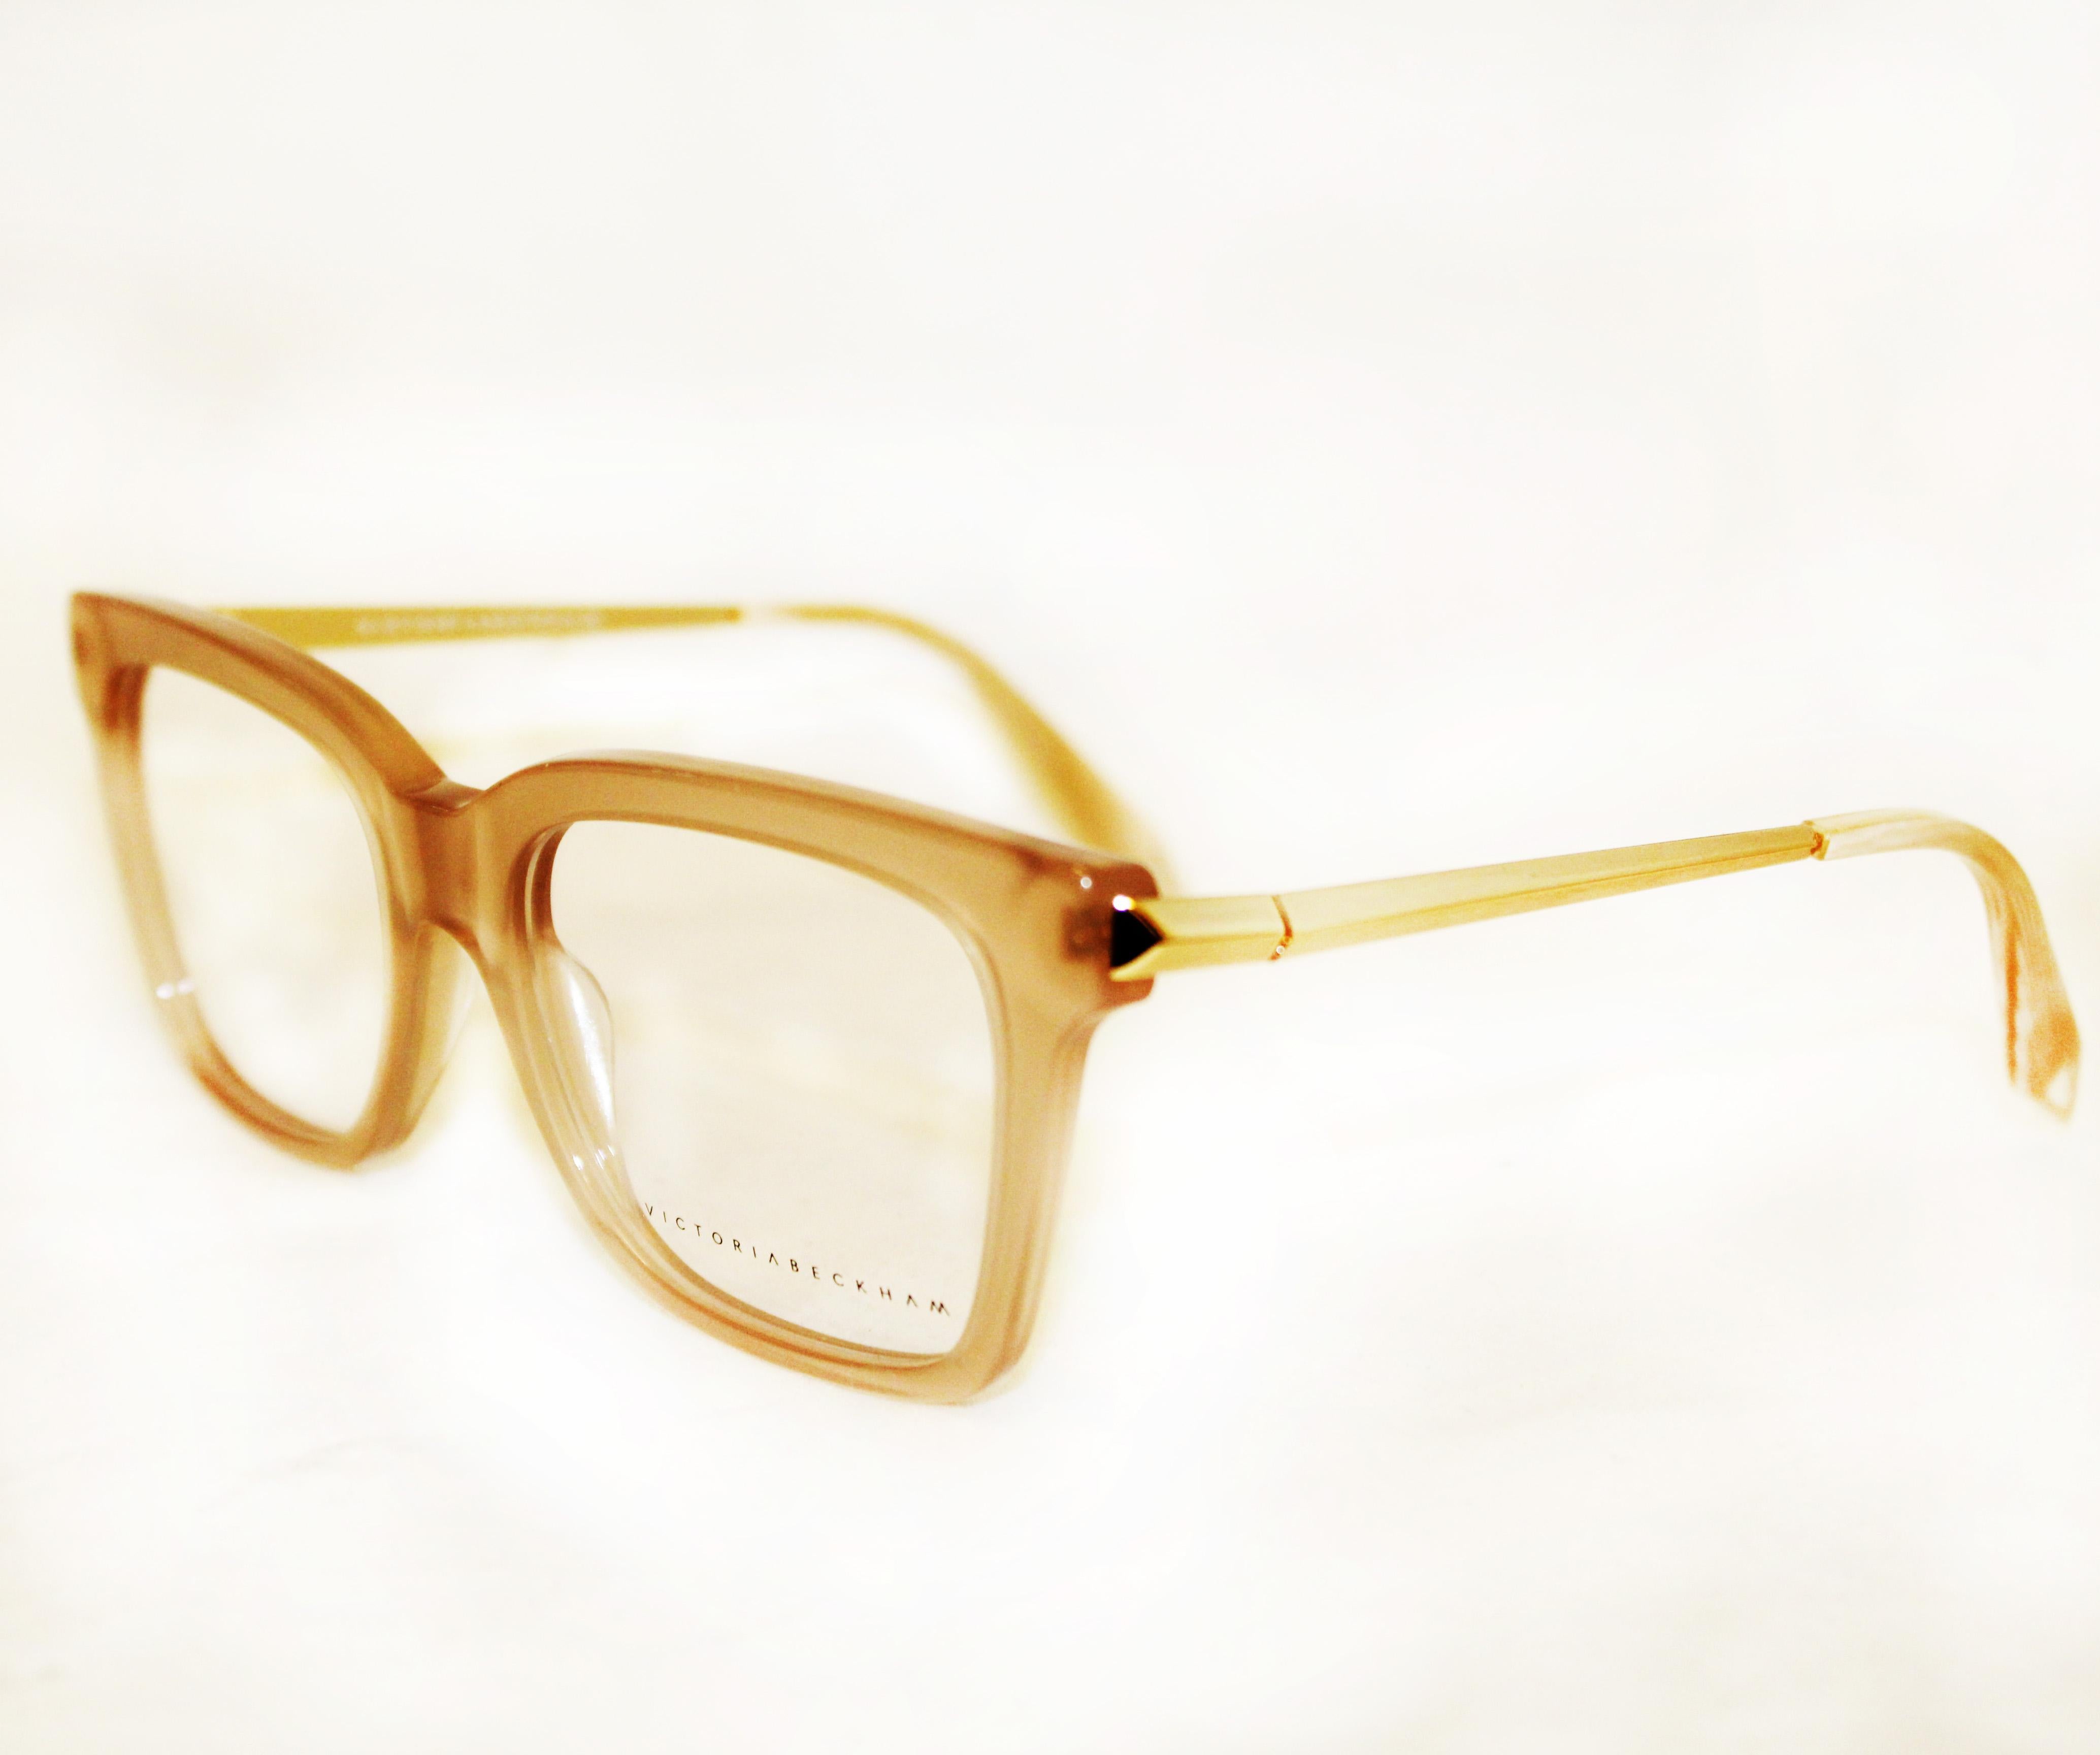 Victoria Beckham  Square Glasses  In Excellent Condition For Sale In Palm Beach, FL